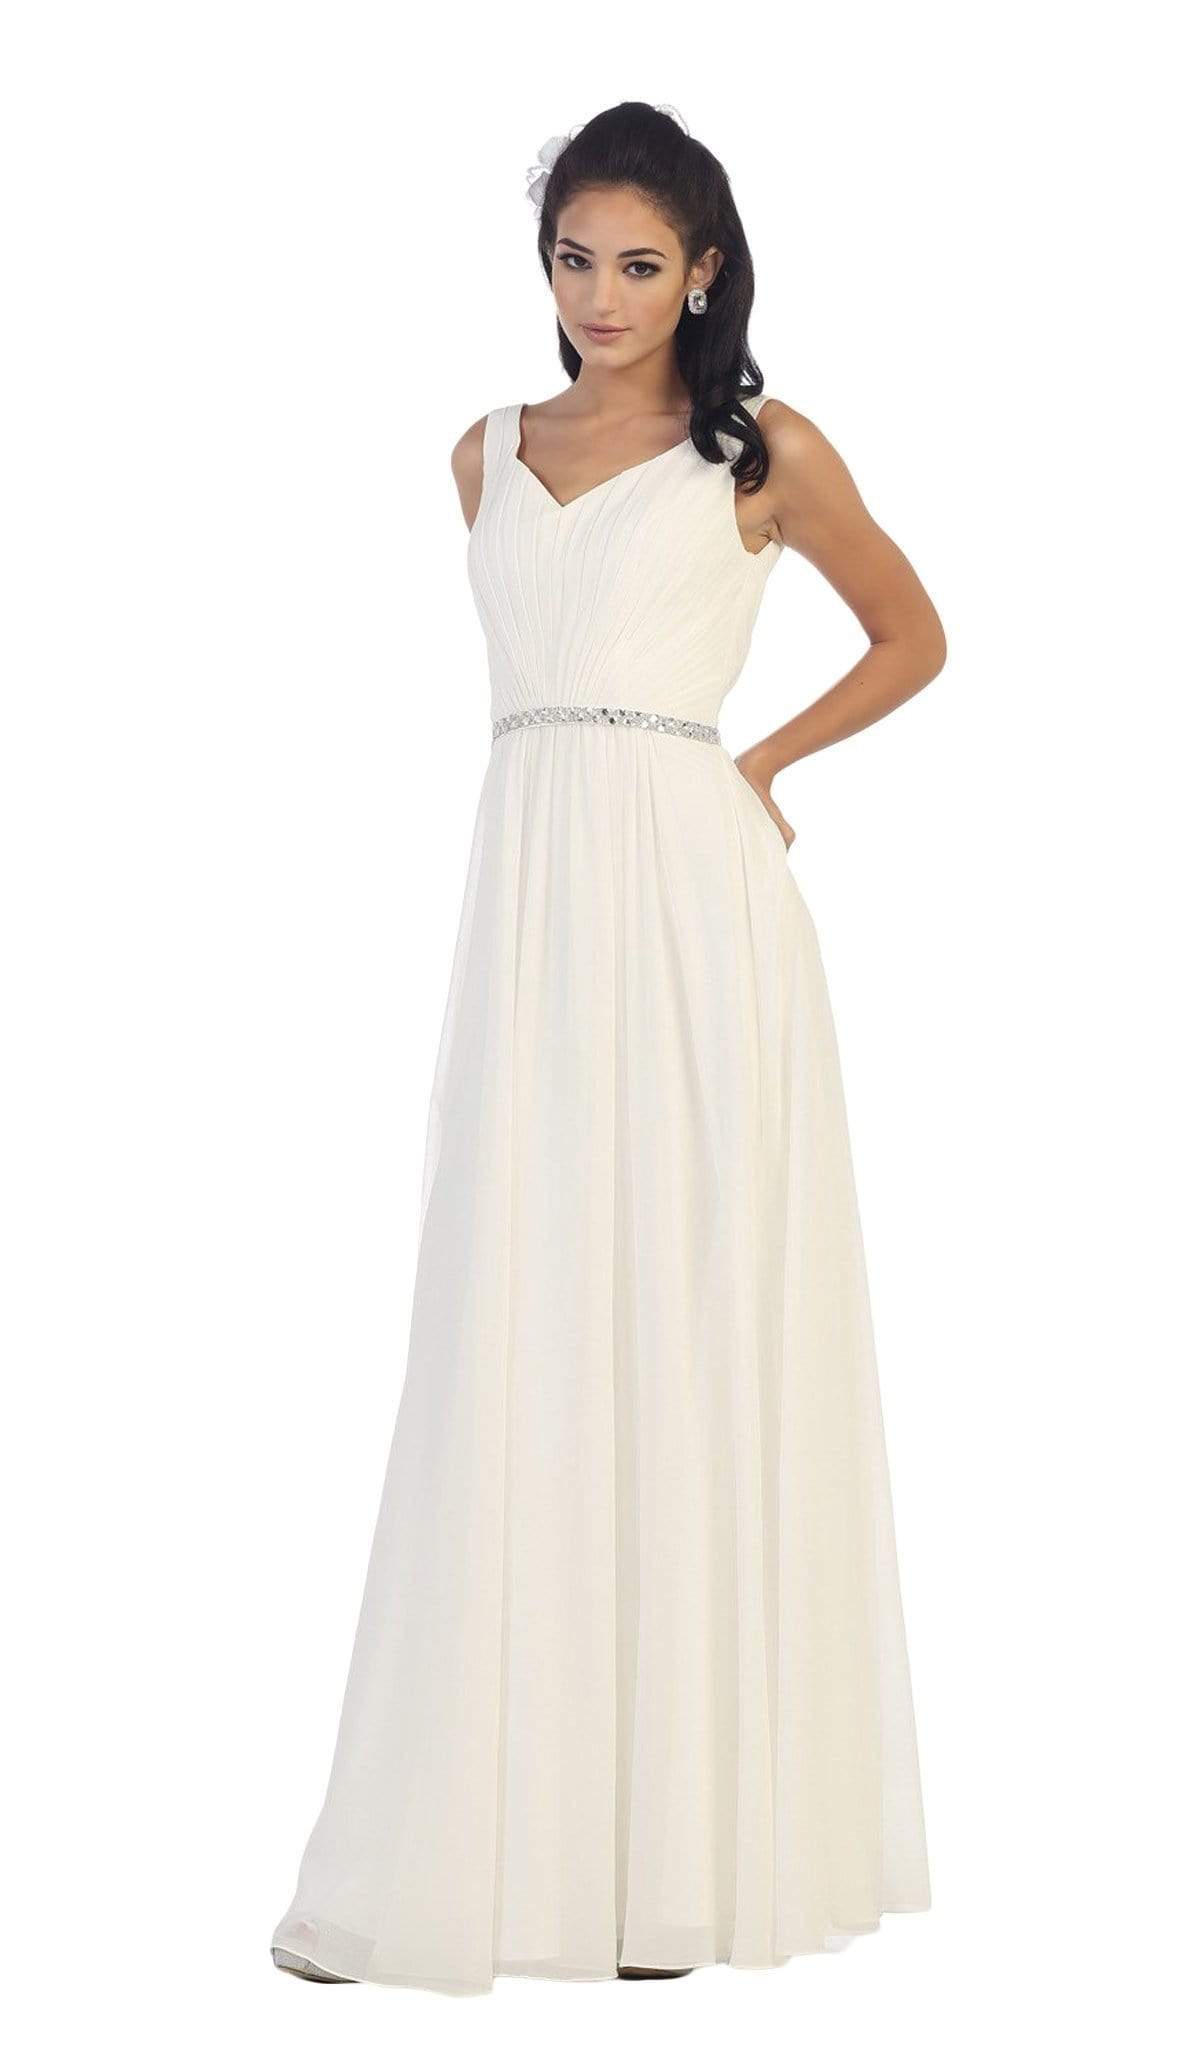 May Queen - Jeweled V-Neck Chiffon A-Line Evening Dress